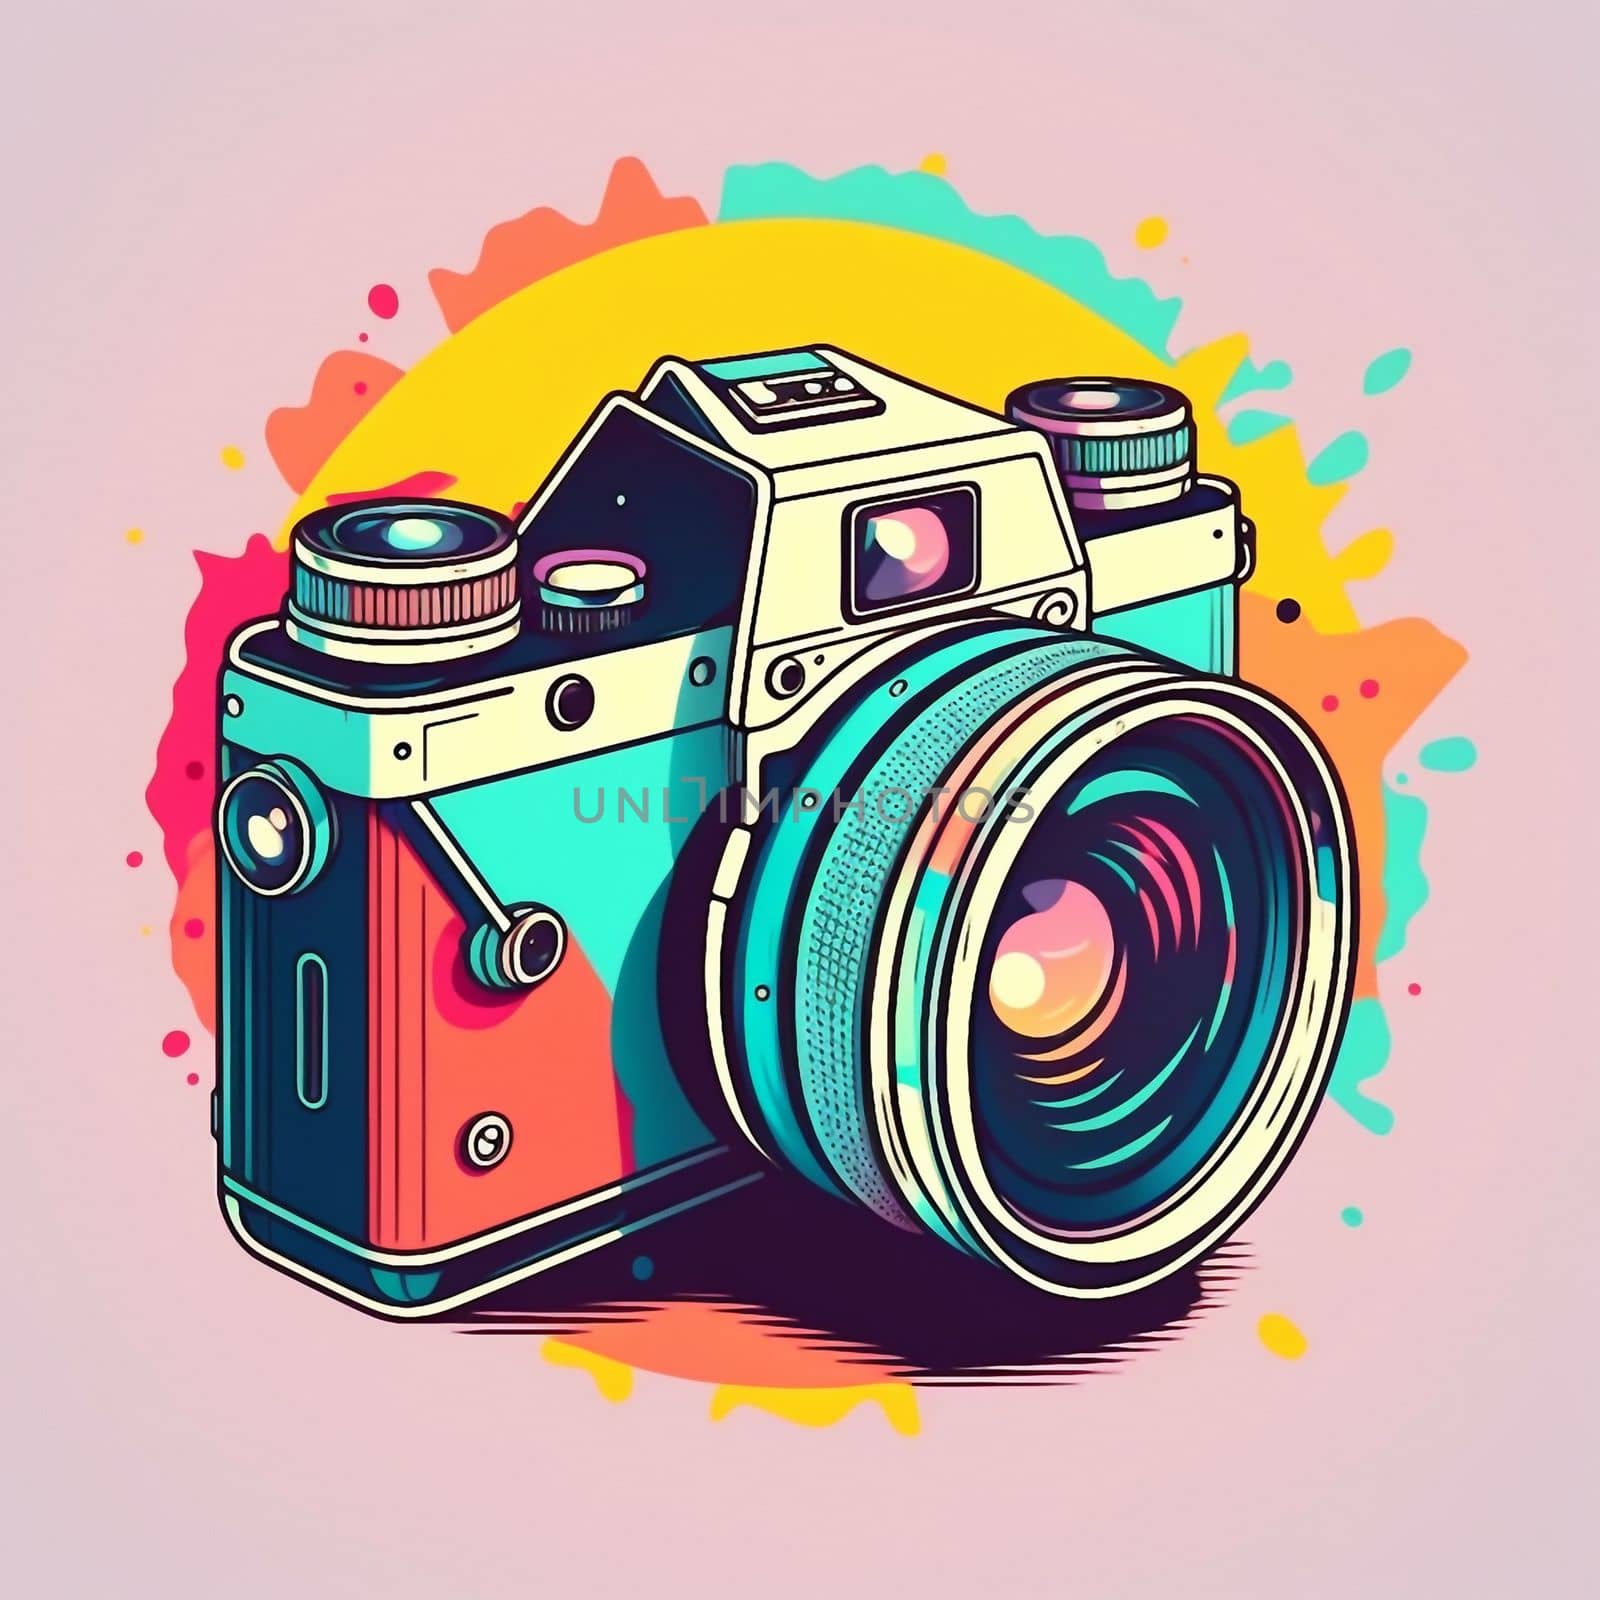 Camera cartoon graphic image colorful illustration by NeuroSky